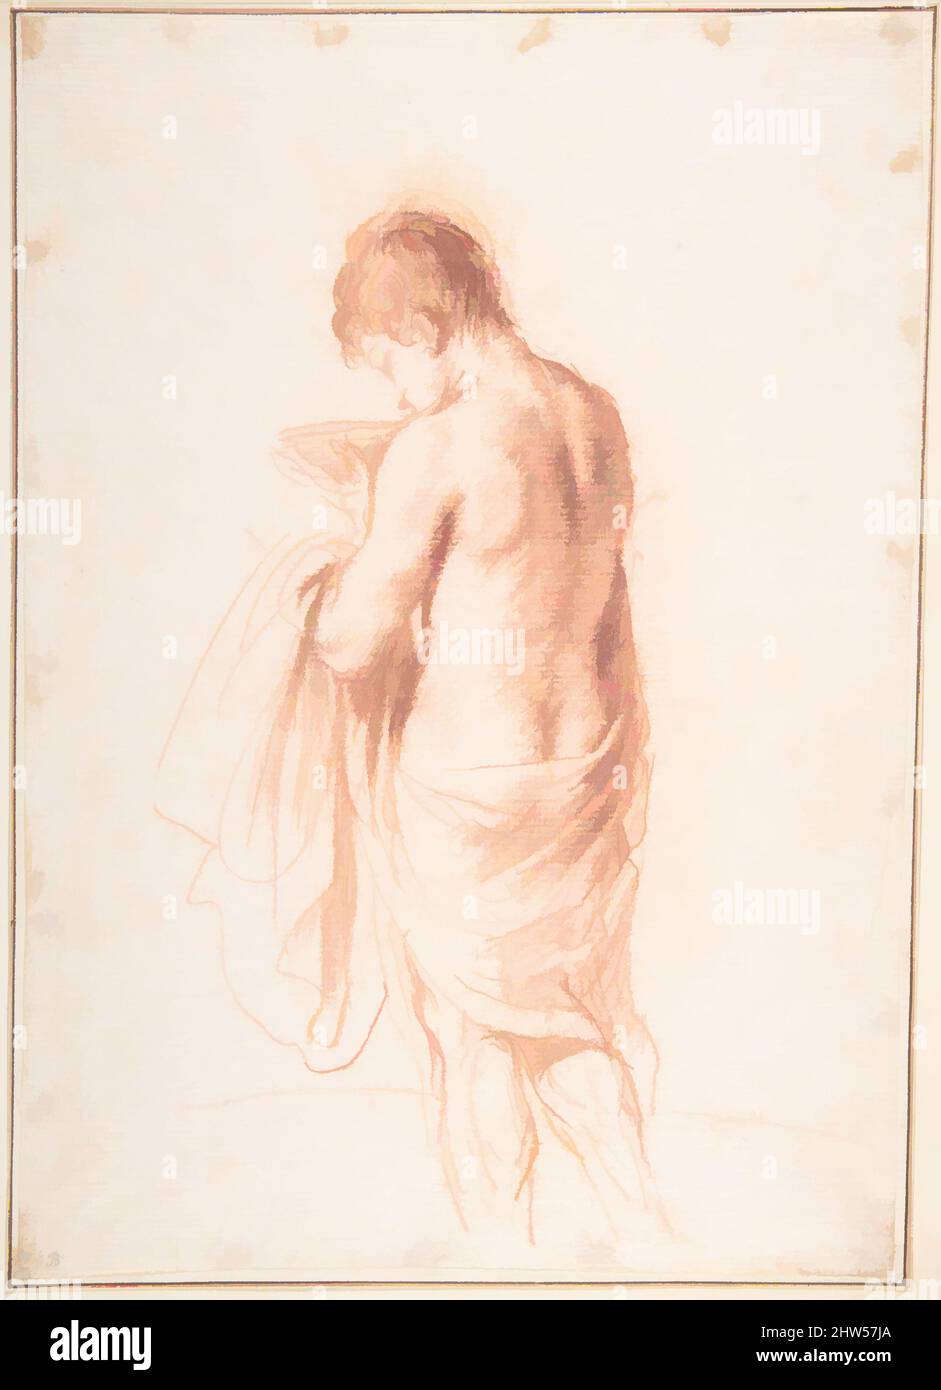 Art inspired by Standing Youth Seen from Behind Holding a Bowl (Ganymede?), ca. 1635–45, Red chalk, Sheet: 10 1/2 x 7 1/2 in. (26.7 x 19.1 cm)., Drawings, Guercino (Giovanni Francesco Barbieri) (Italian, Cento 1591–1666 Bologna), Traditionally identified as a study for the figure of, Classic works modernized by Artotop with a splash of modernity. Shapes, color and value, eye-catching visual impact on art. Emotions through freedom of artworks in a contemporary way. A timeless message pursuing a wildly creative new direction. Artists turning to the digital medium and creating the Artotop NFT Stock Photo